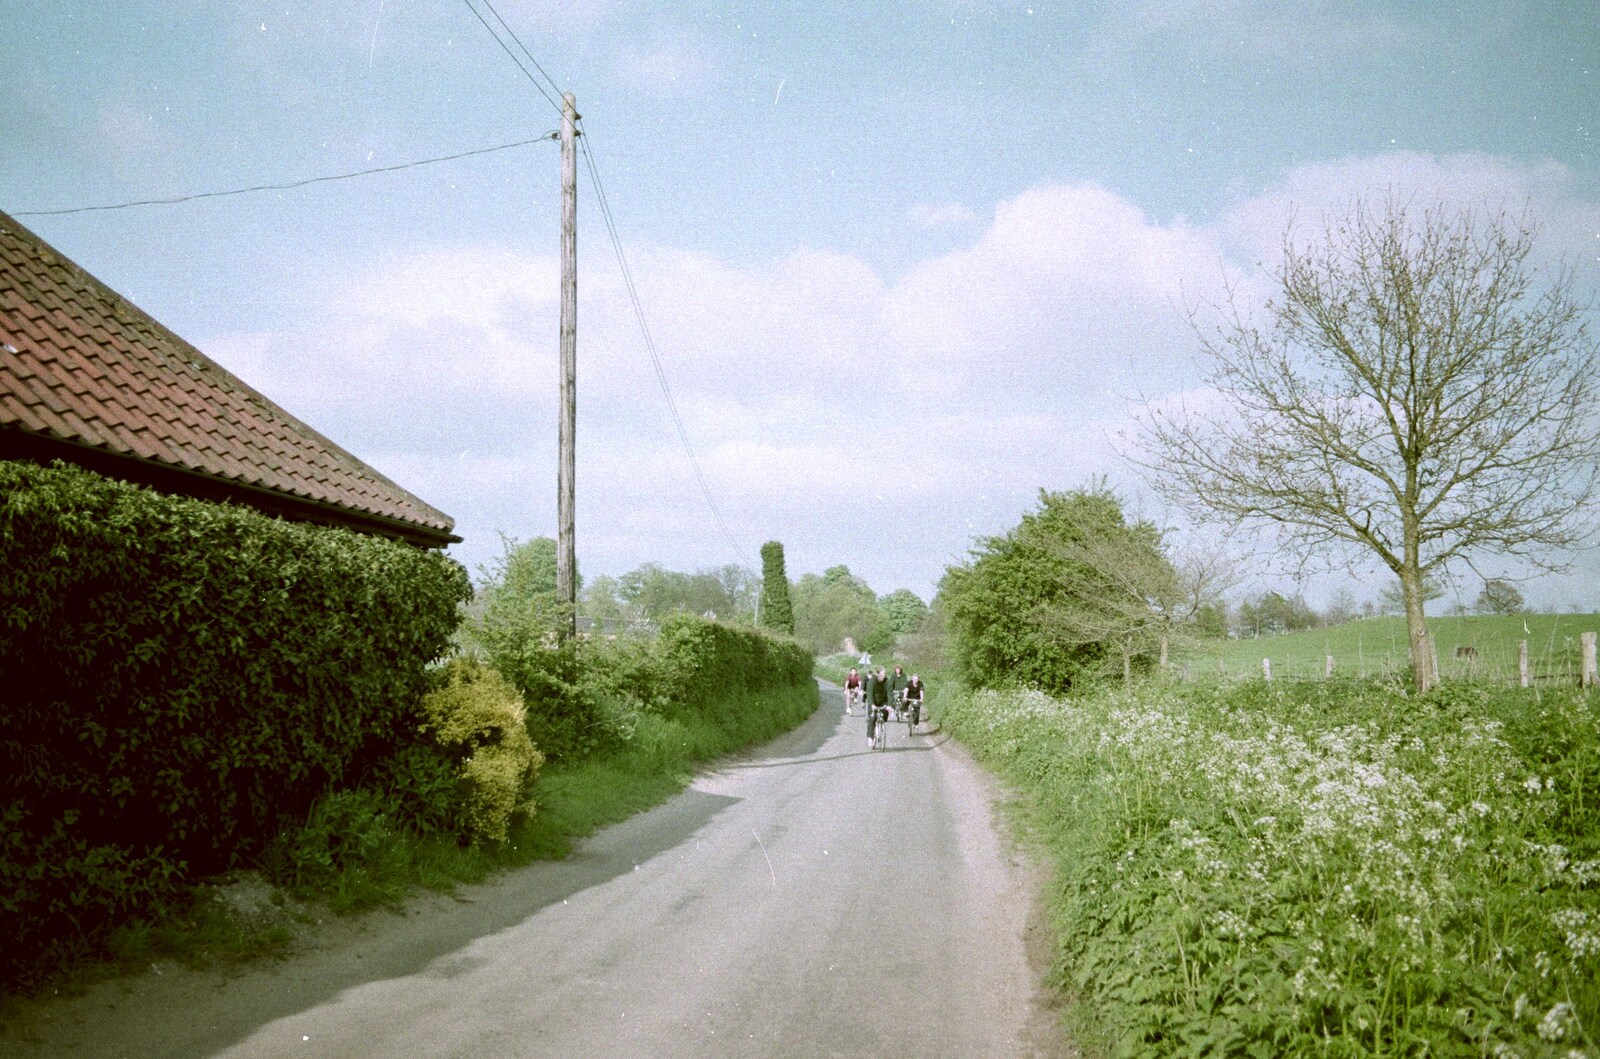 The gang heads back from Brockdish from A BSCC Bike Ride, Brockdish Greyhound and Hoxne Swan, Suffolk - 4th May 2000